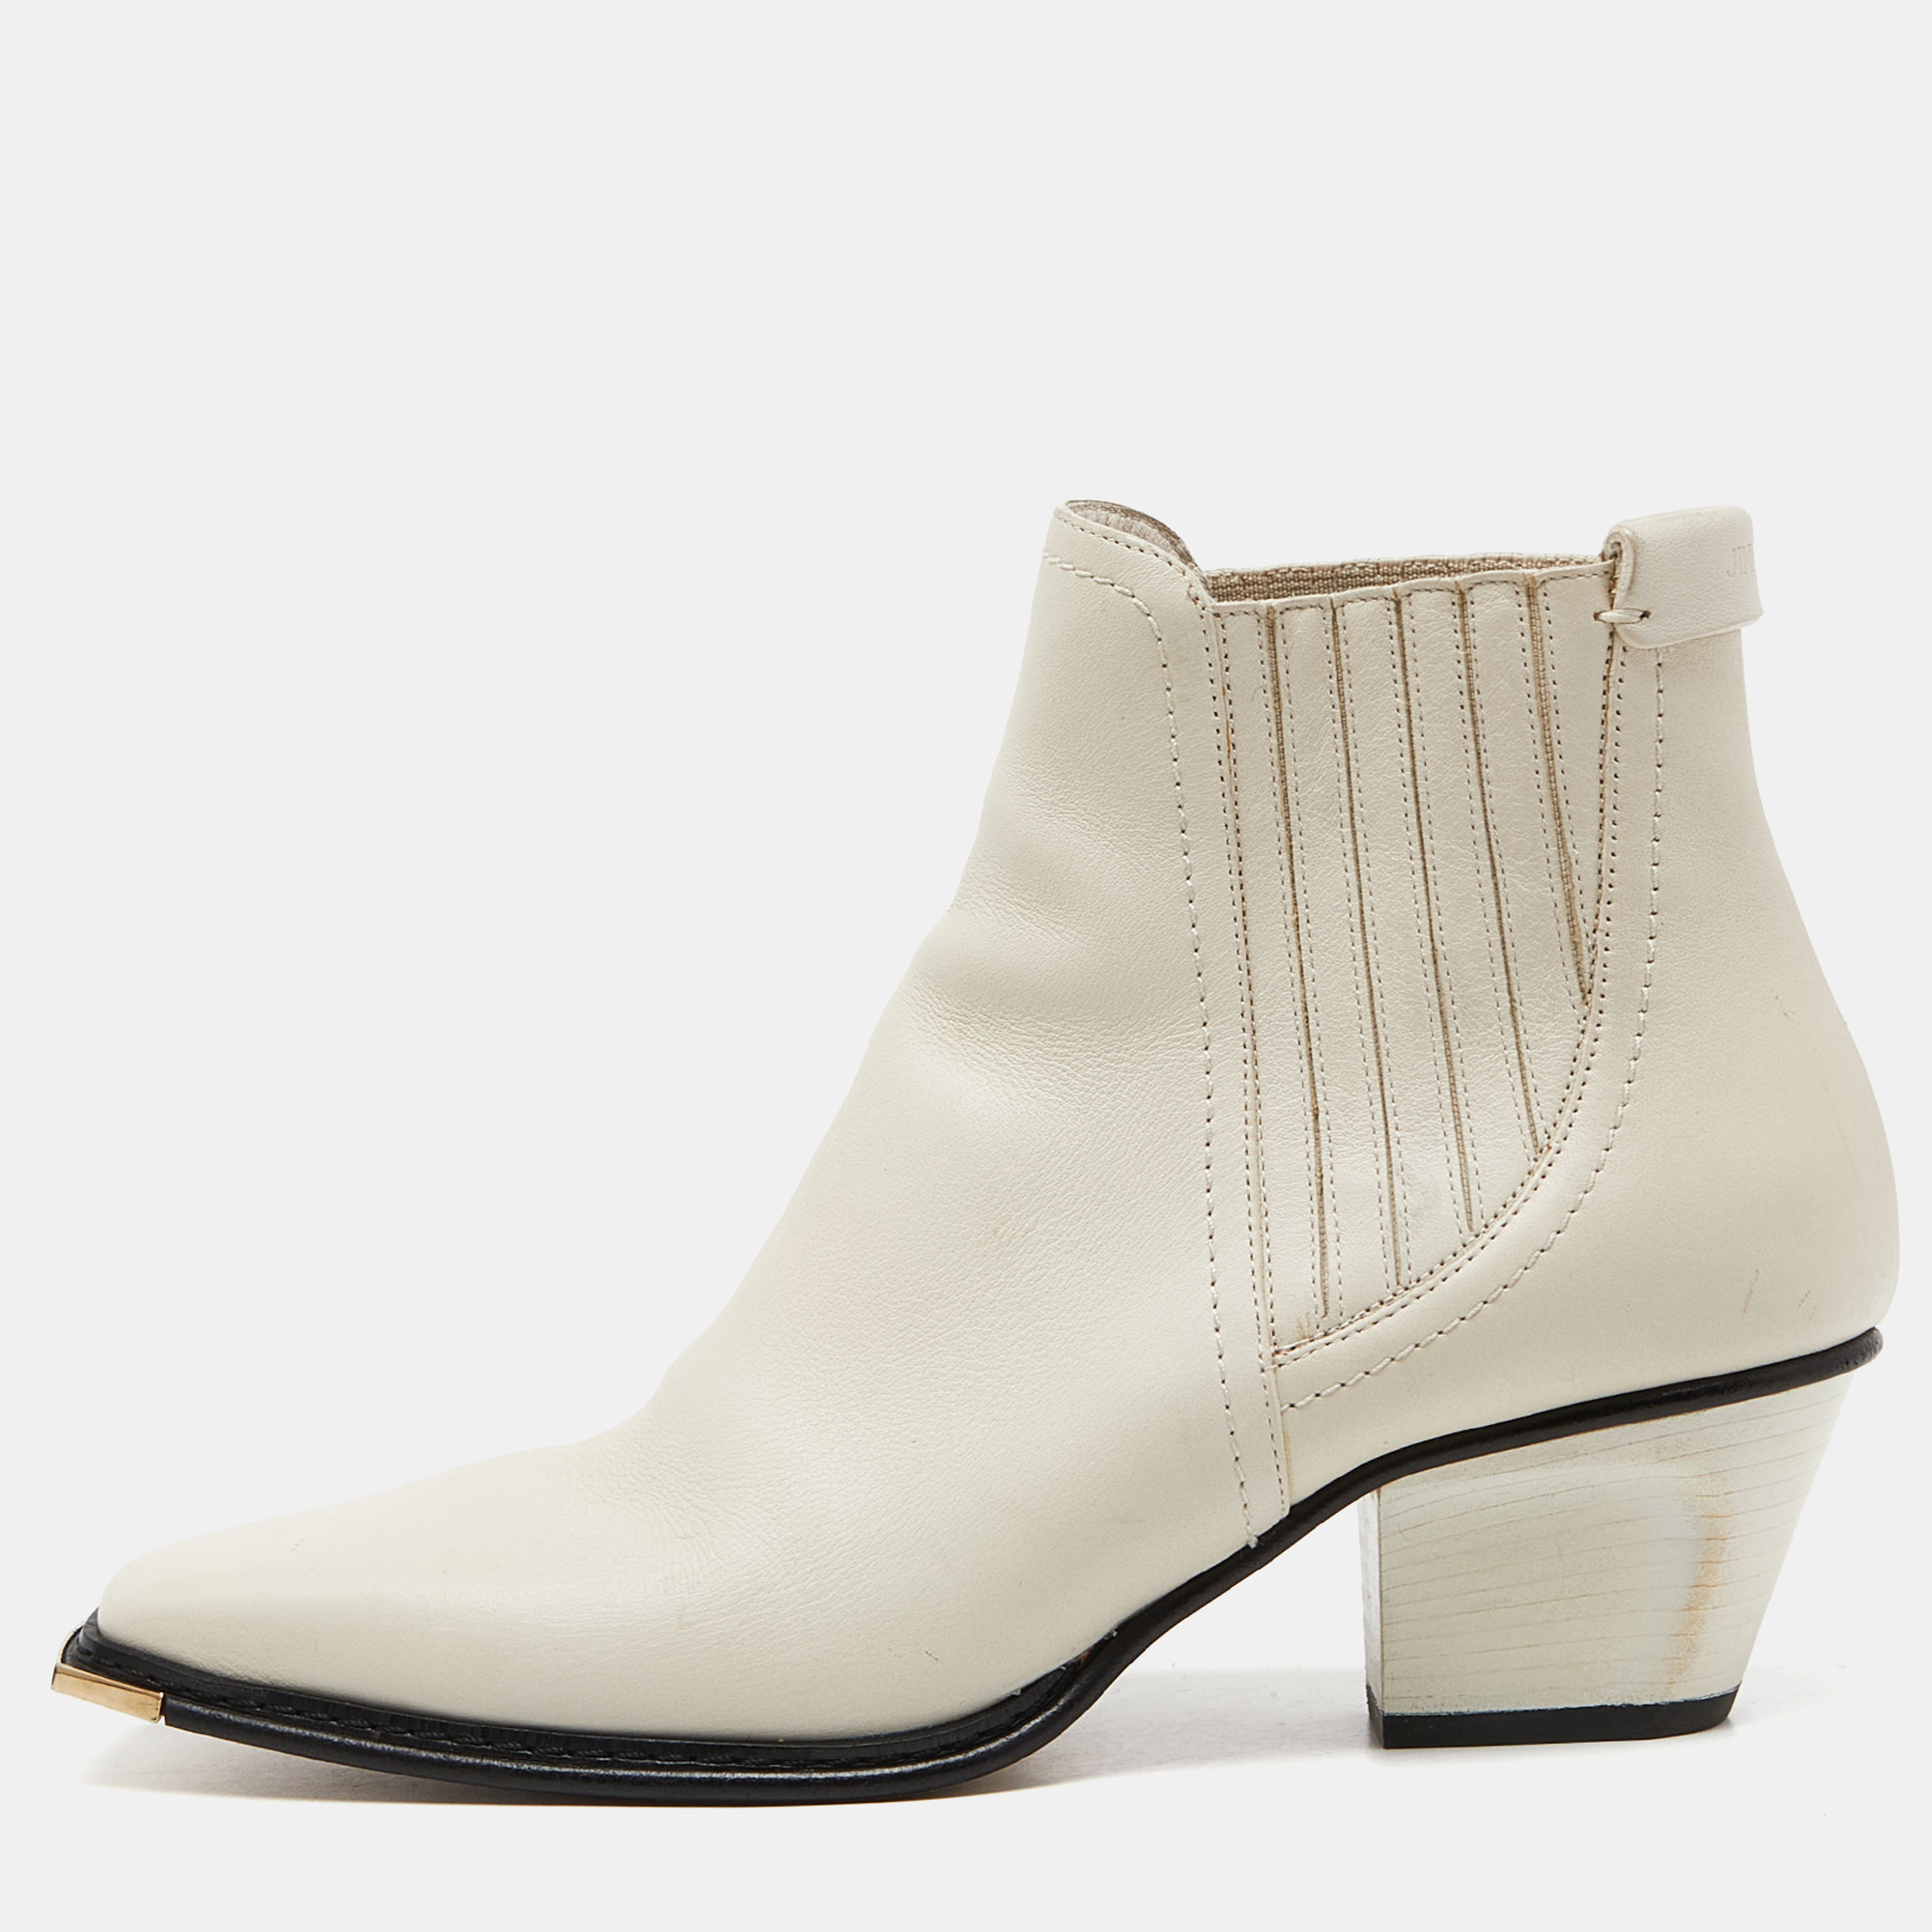 Pre-owned Jimmy Choo Off White Leather Ankle Boots Size 37